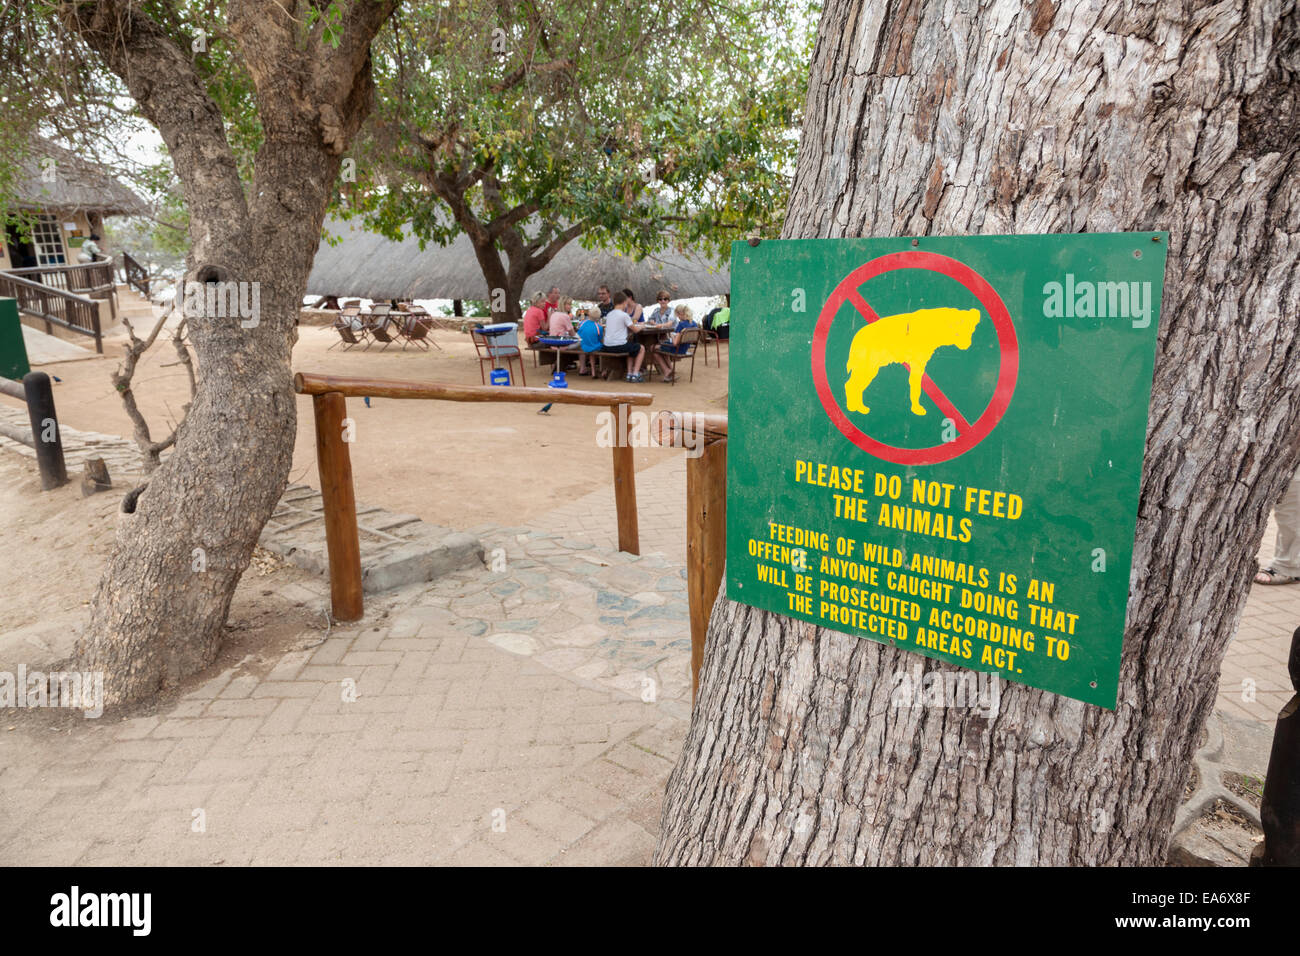 Don't feed the animals sign, picnic spot, Kruger national park, South Africa Stock Photo